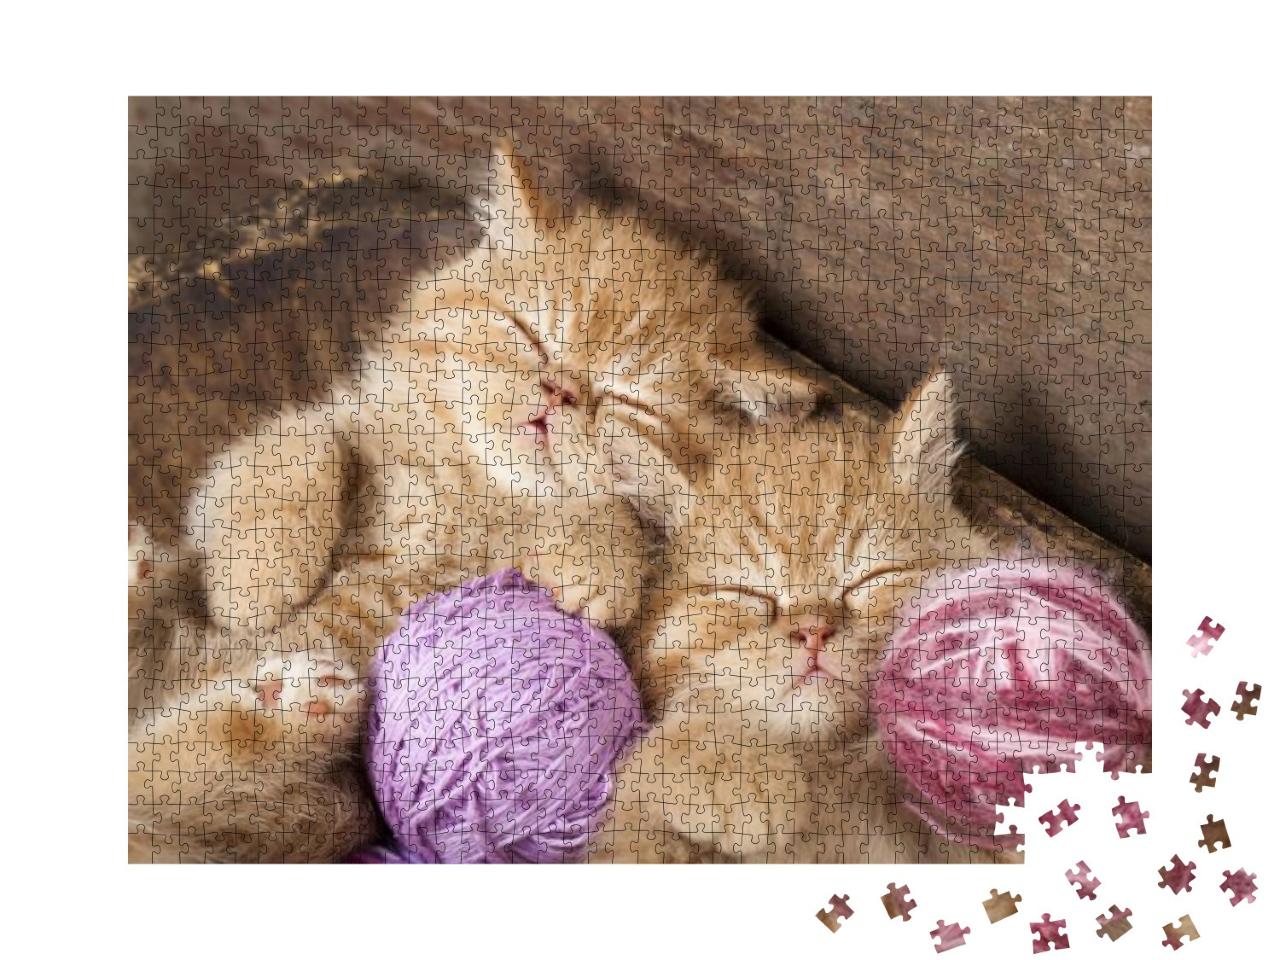 Exotic Kittens Sleeping with a Ball of Wool... Jigsaw Puzzle with 1000 pieces